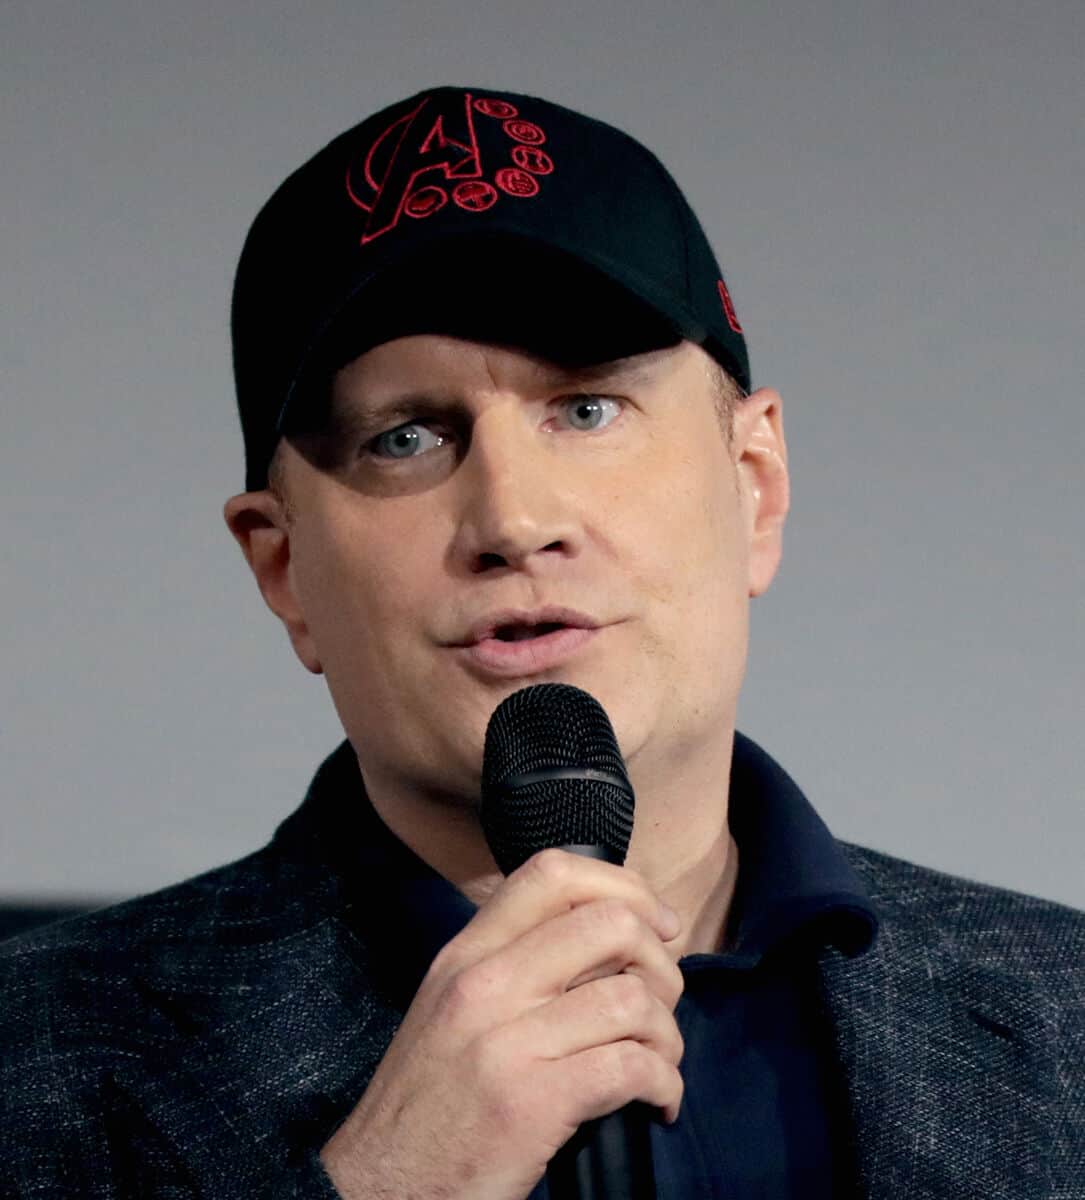 Kevin Feige - Famous Film Producer